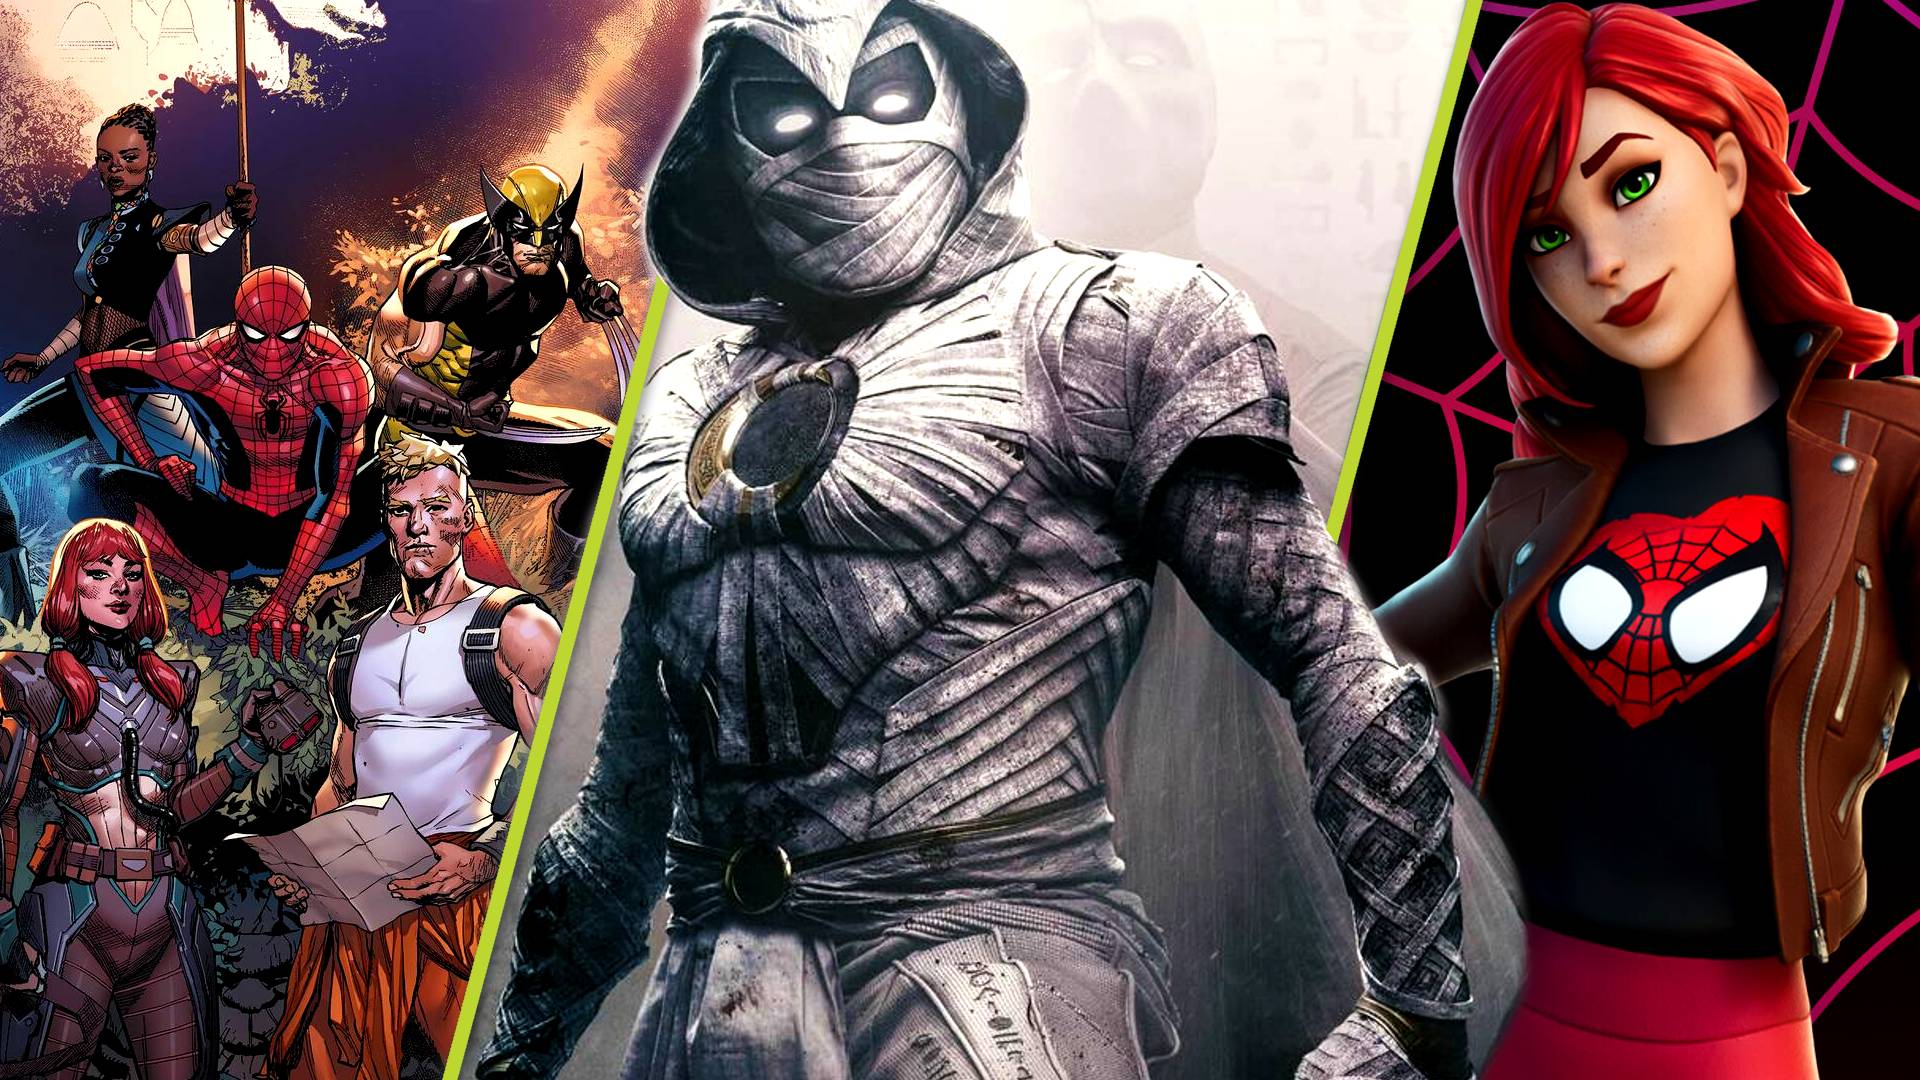 Marvel's Spider-Man 2 has a Moon Knight skin with some wild history